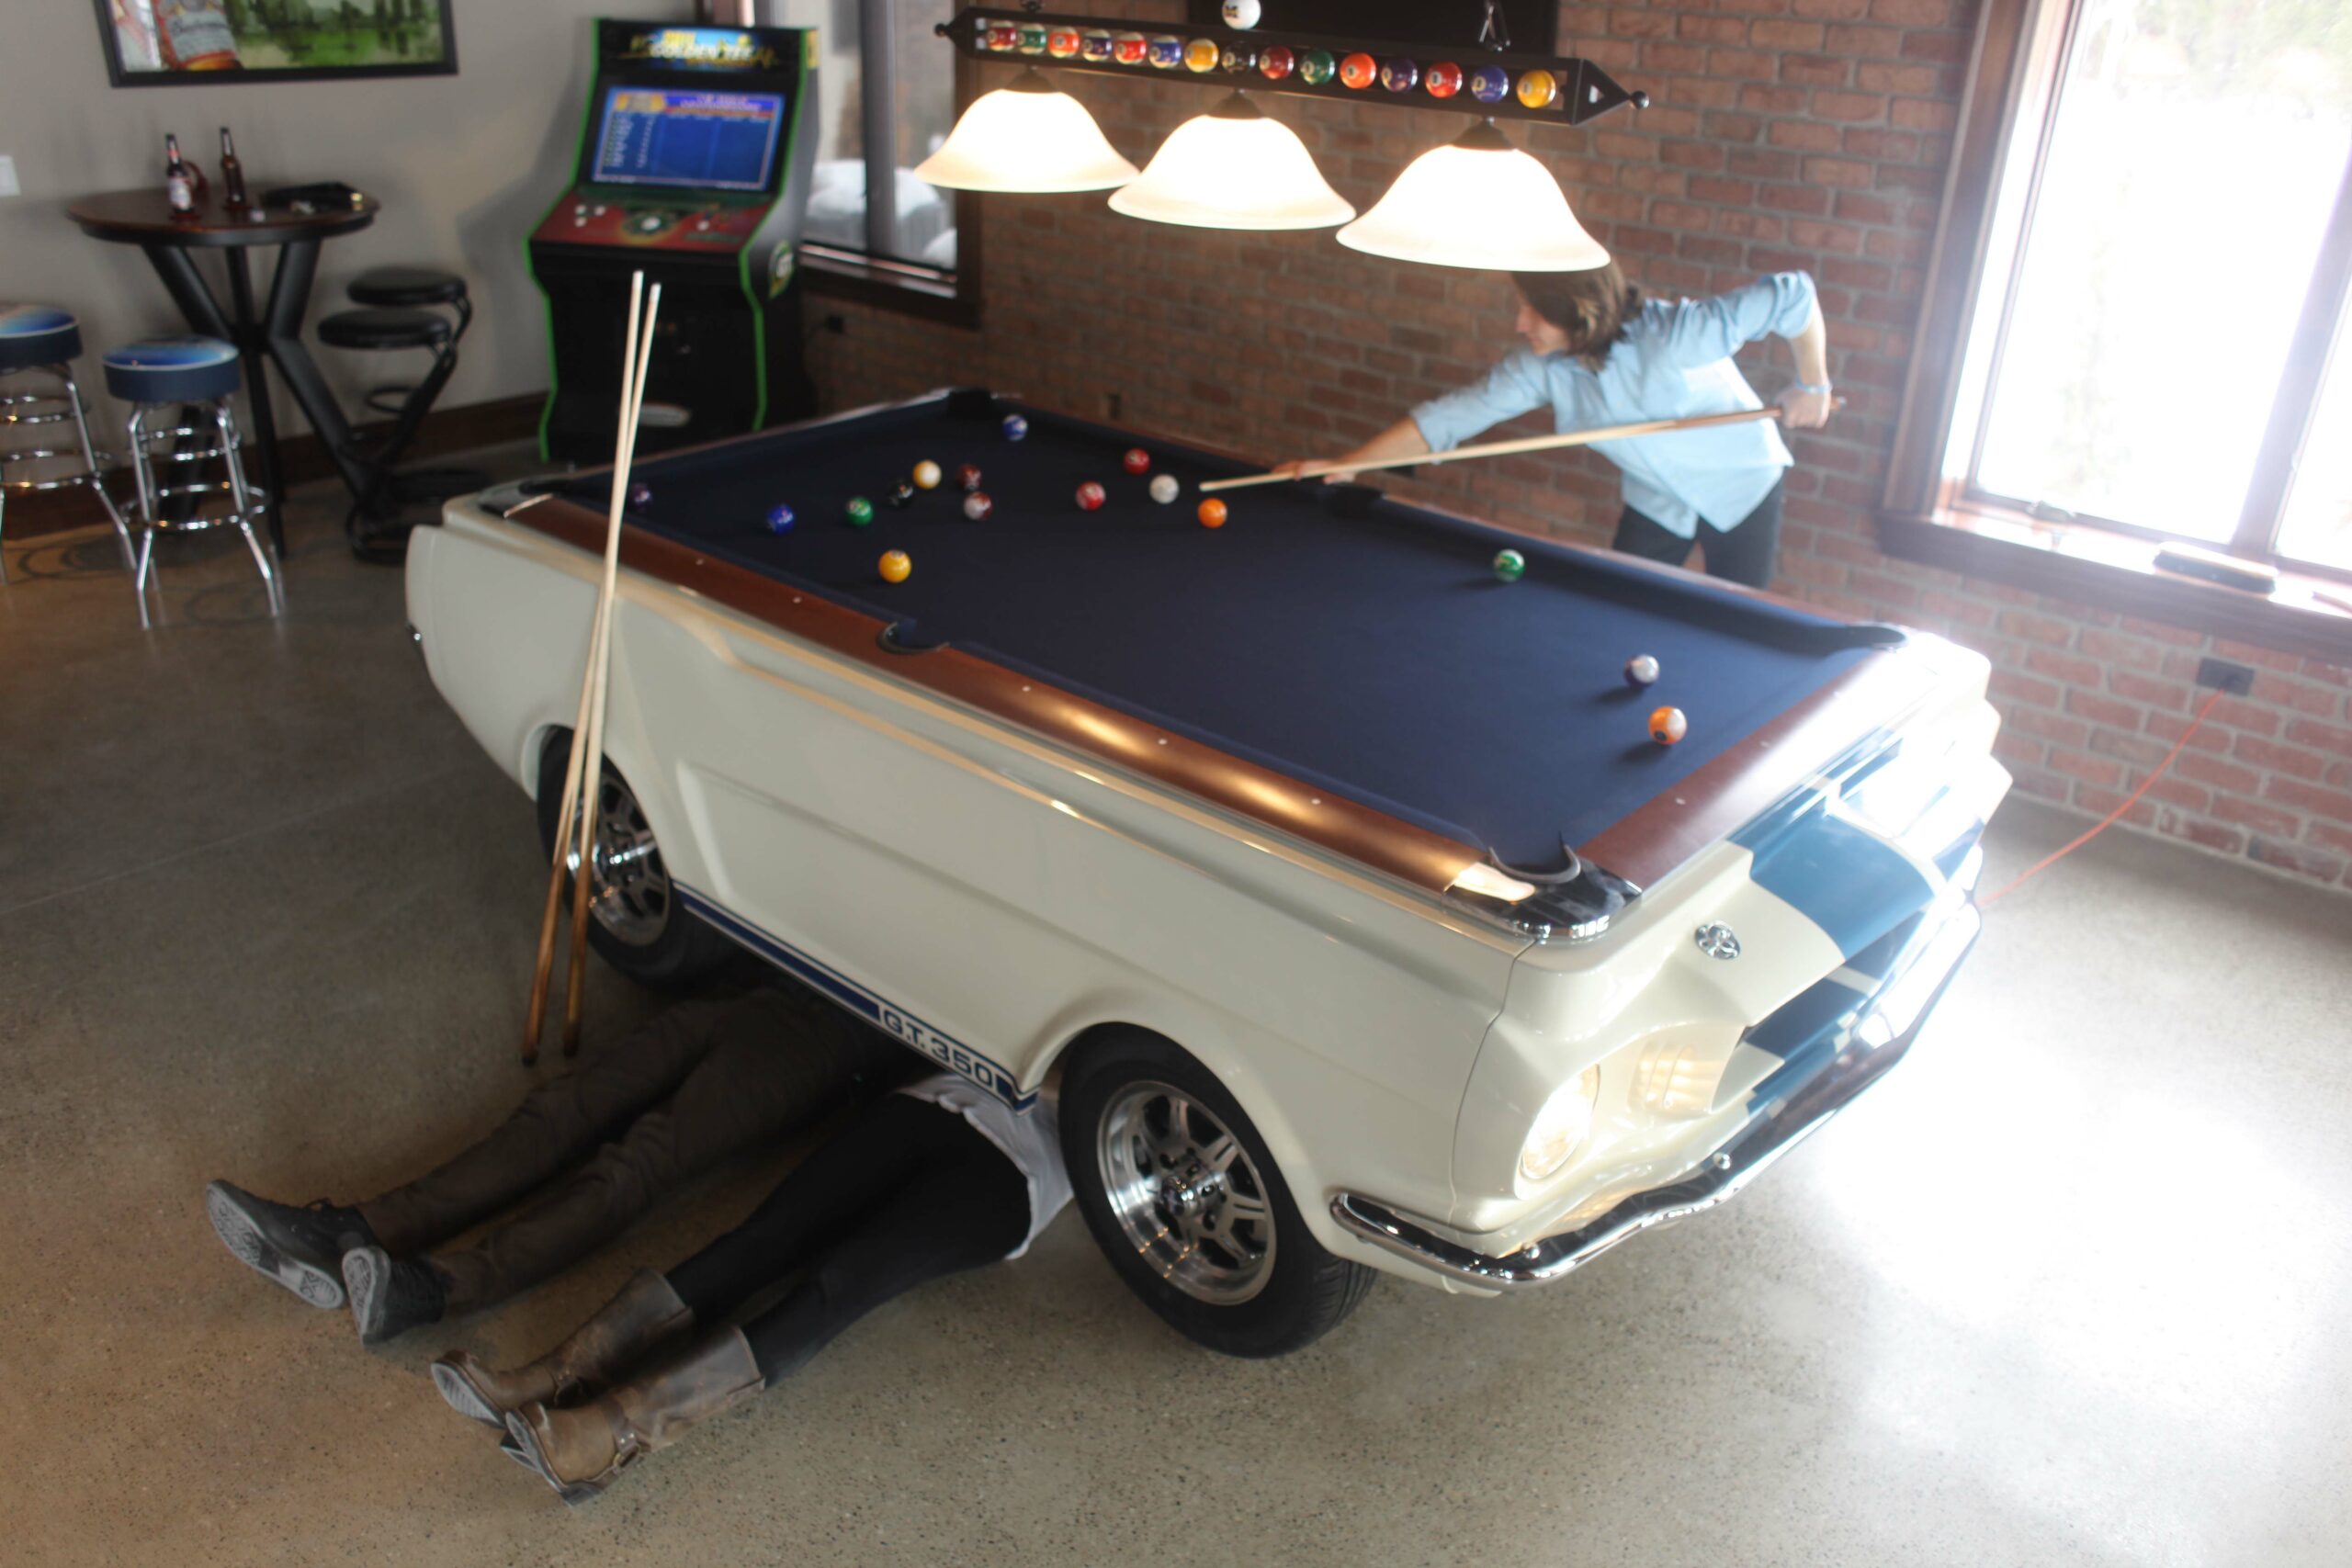 people pretending to be mechanics working under a Ford Shelby car pool table while another is taking a shot!